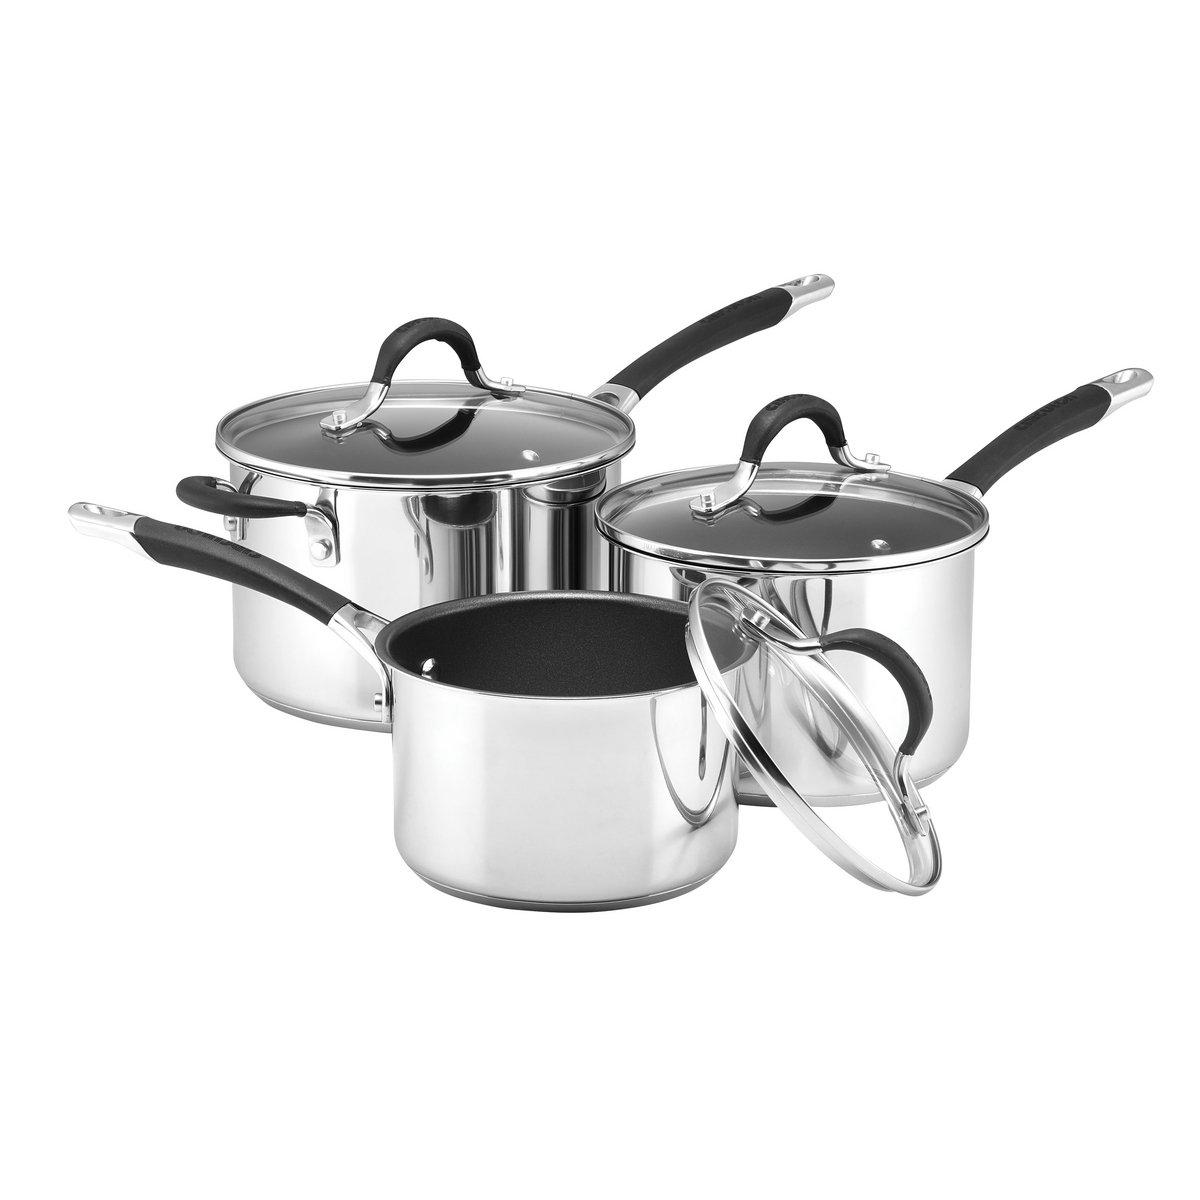 Momentum Saucepan Set in Stainless Steel with Glass Lids - Pack of 3